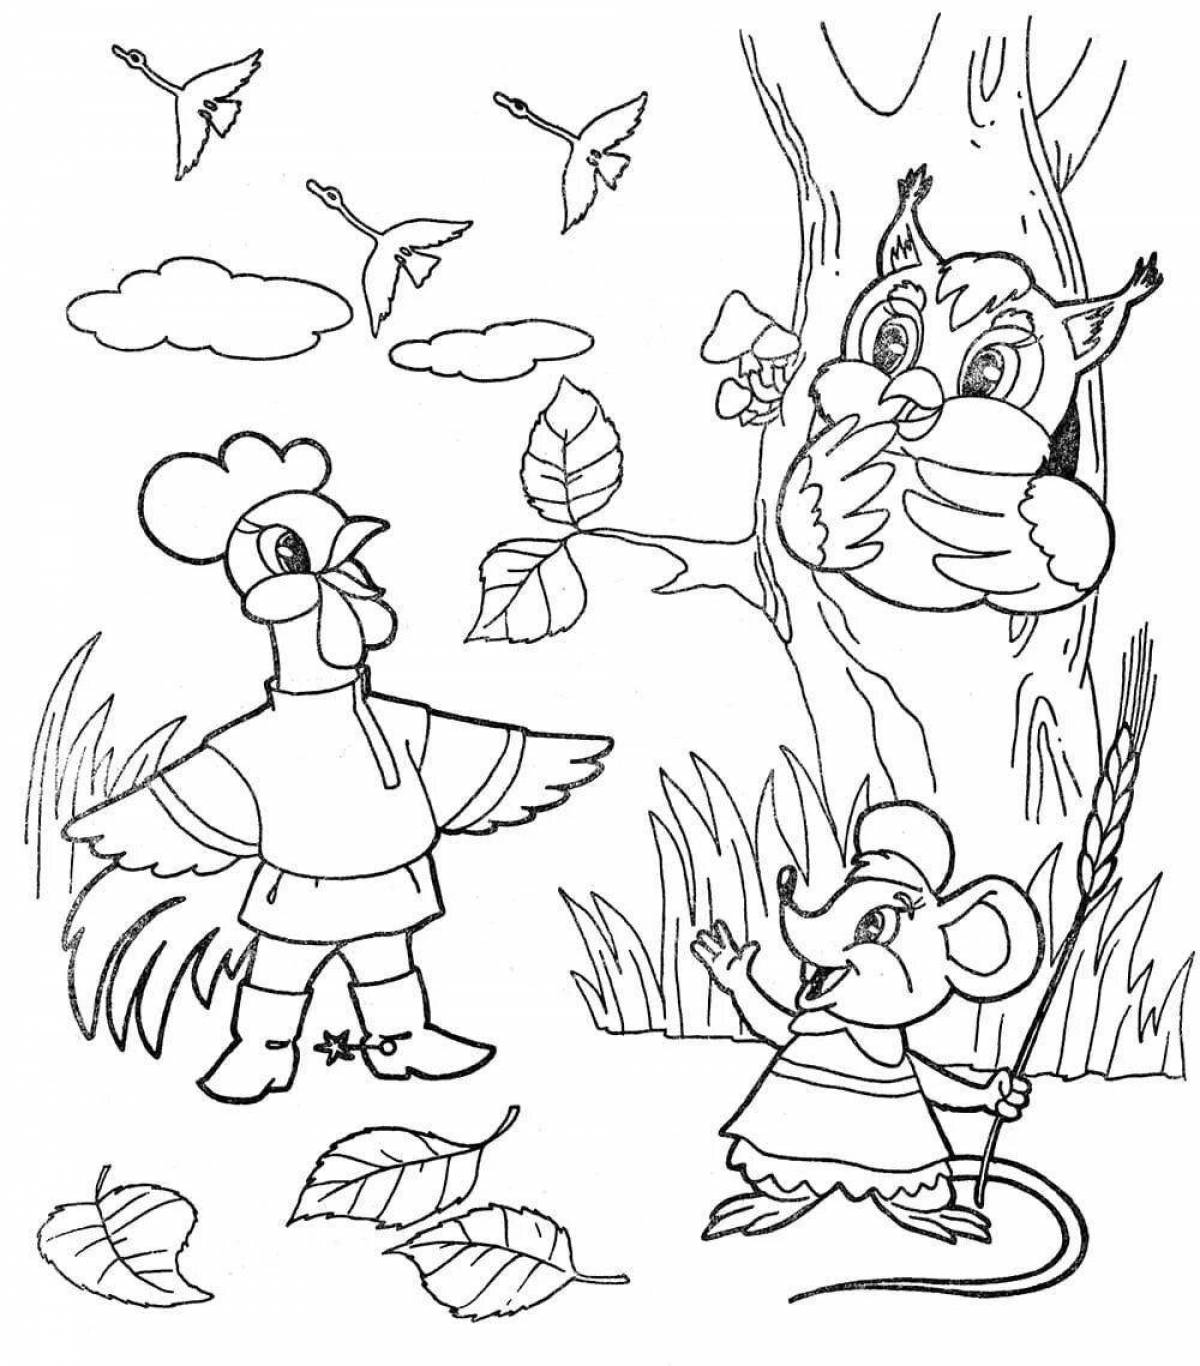 Live autumn coloring for children 6-7 years old